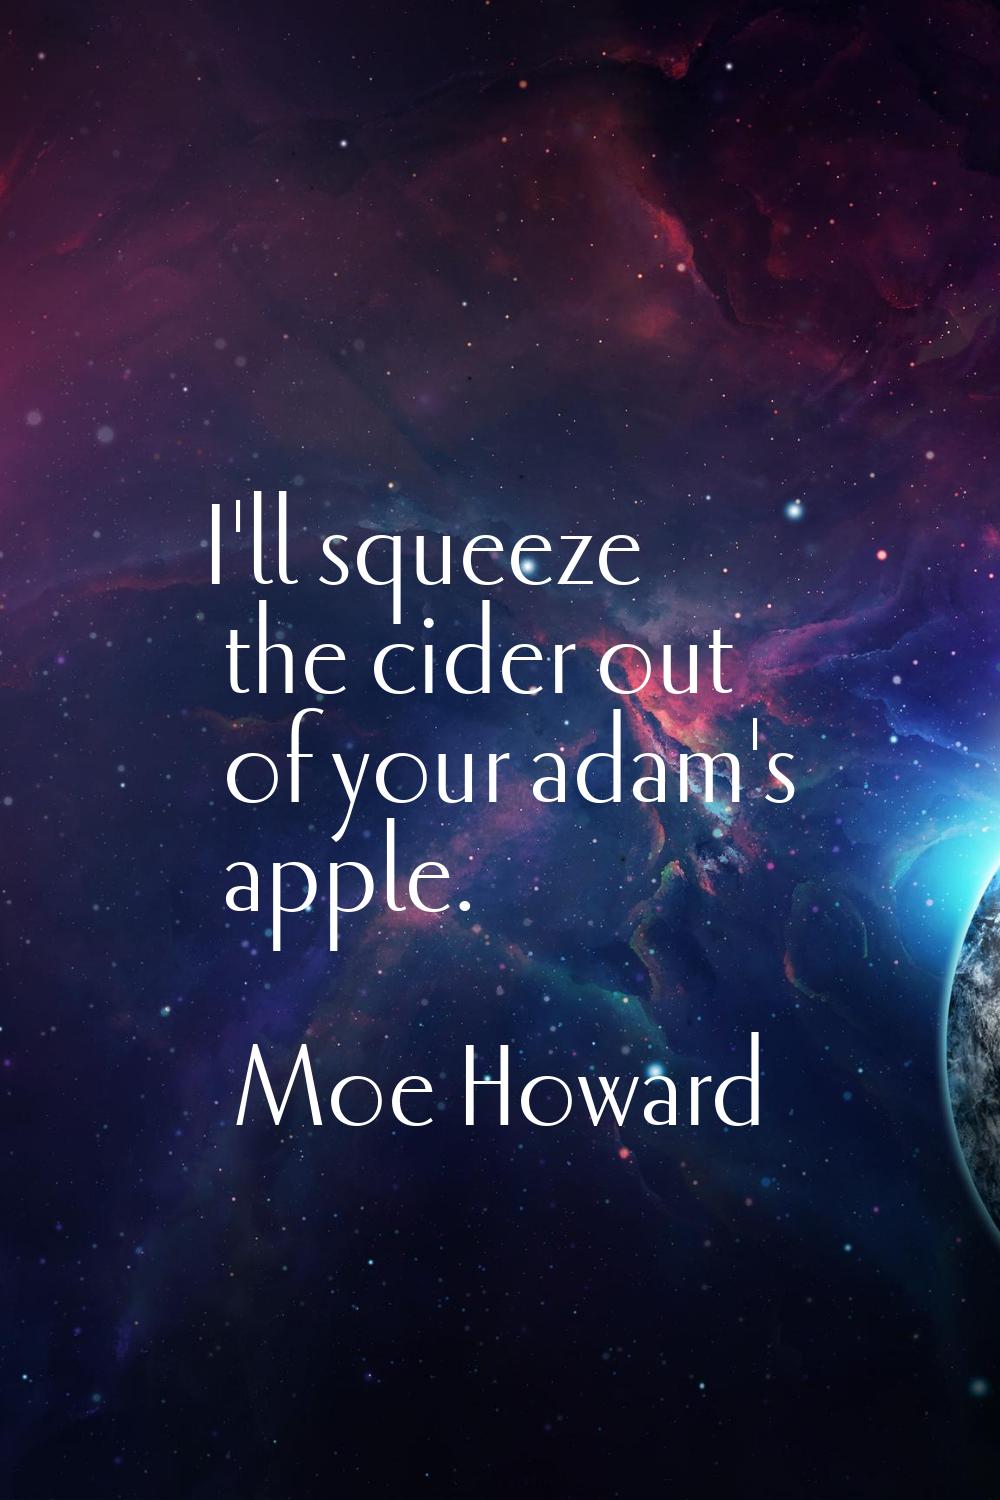 I'll squeeze the cider out of your adam's apple.